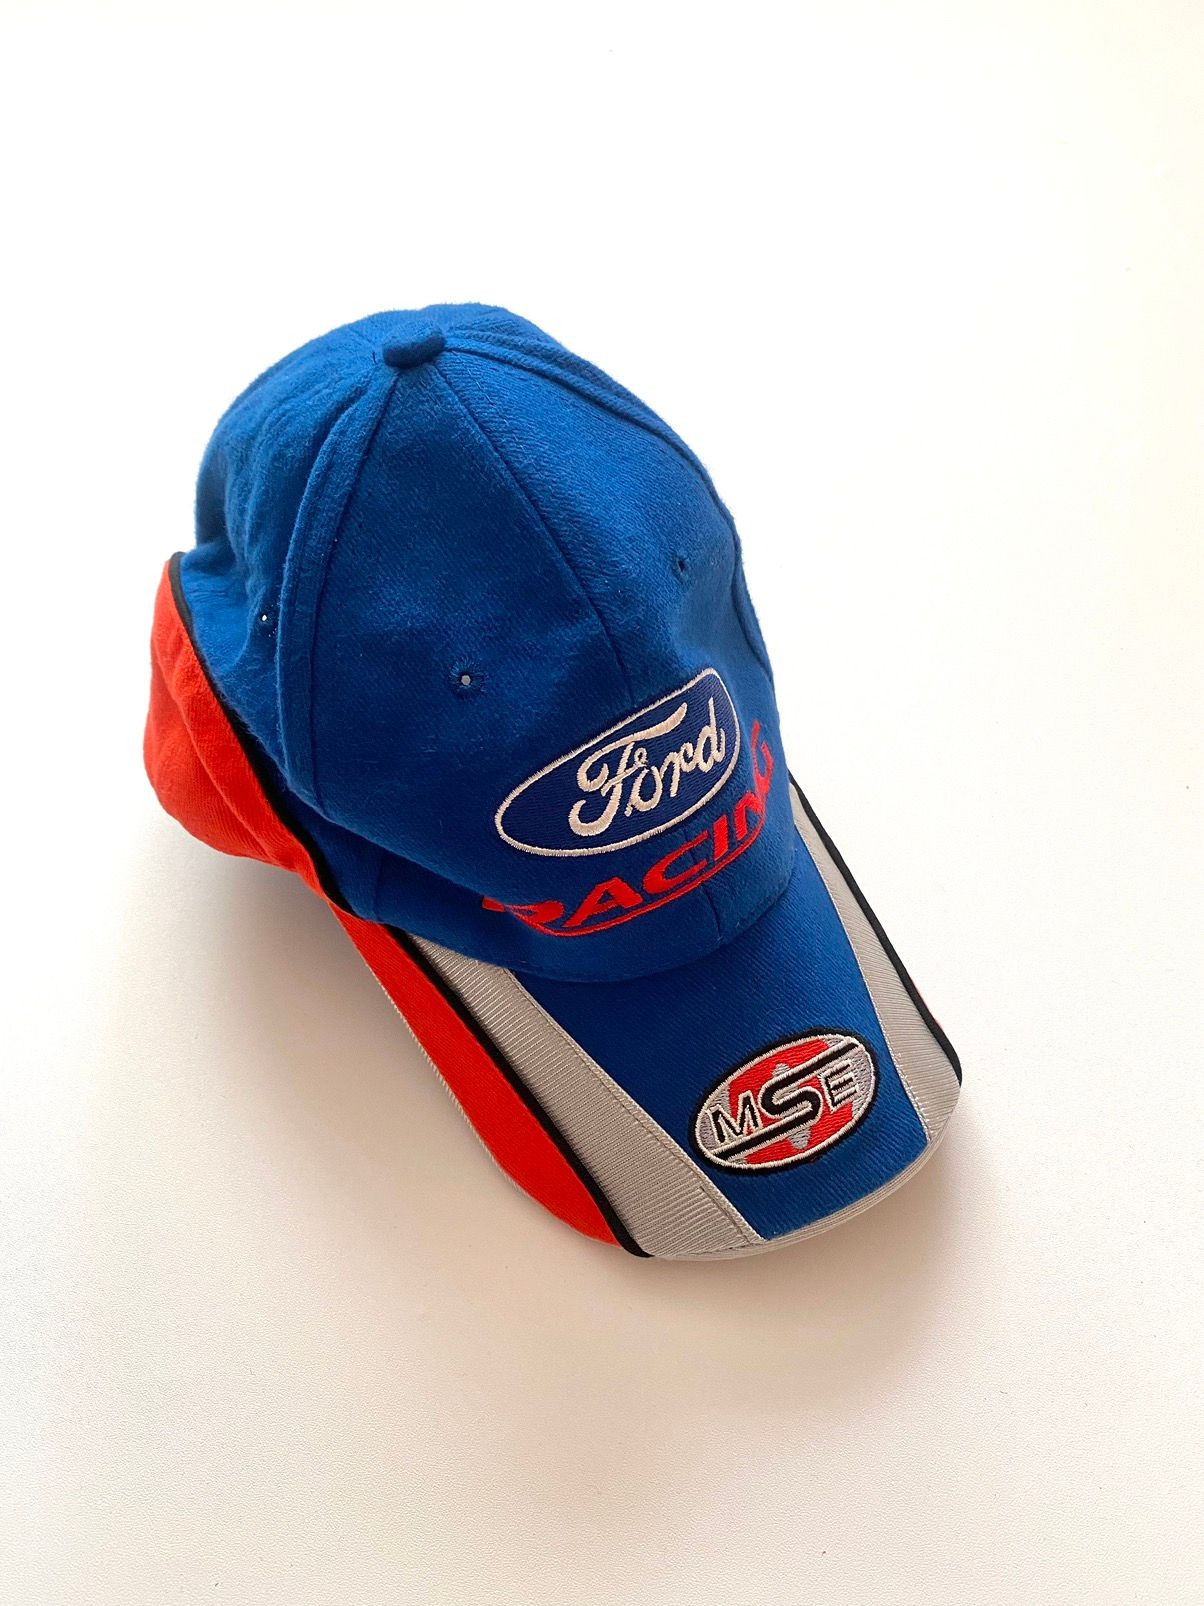 Pre-owned Ford X Vintage Y2k Ford Mustang Gmc Wrs Mse Racing Cap Japan Style In Blue